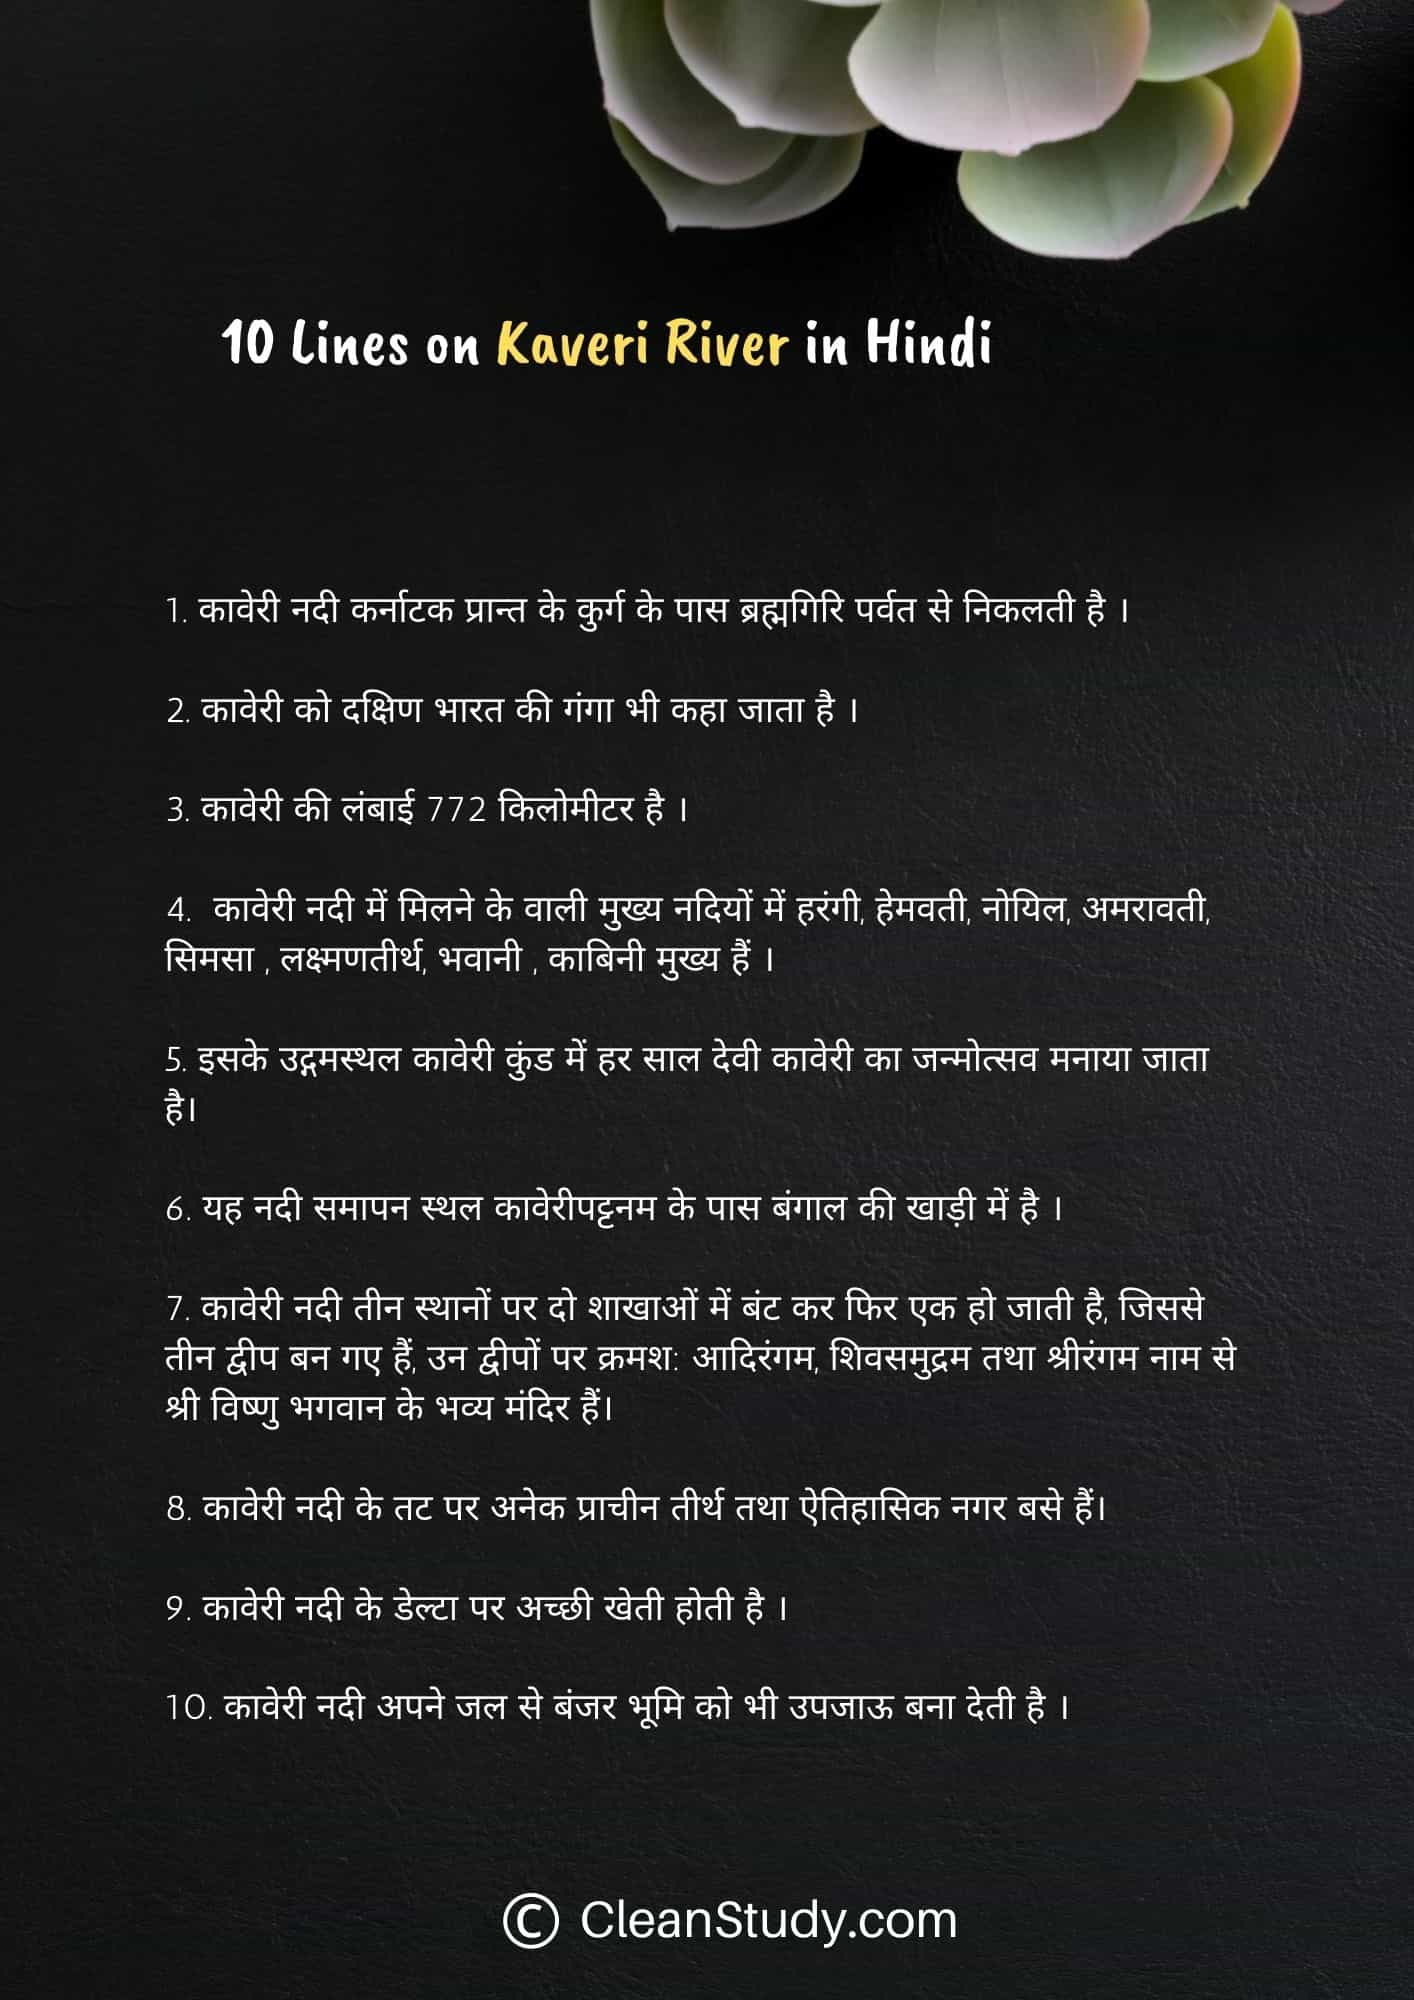 10 Lines on Kaveri River in Hindi